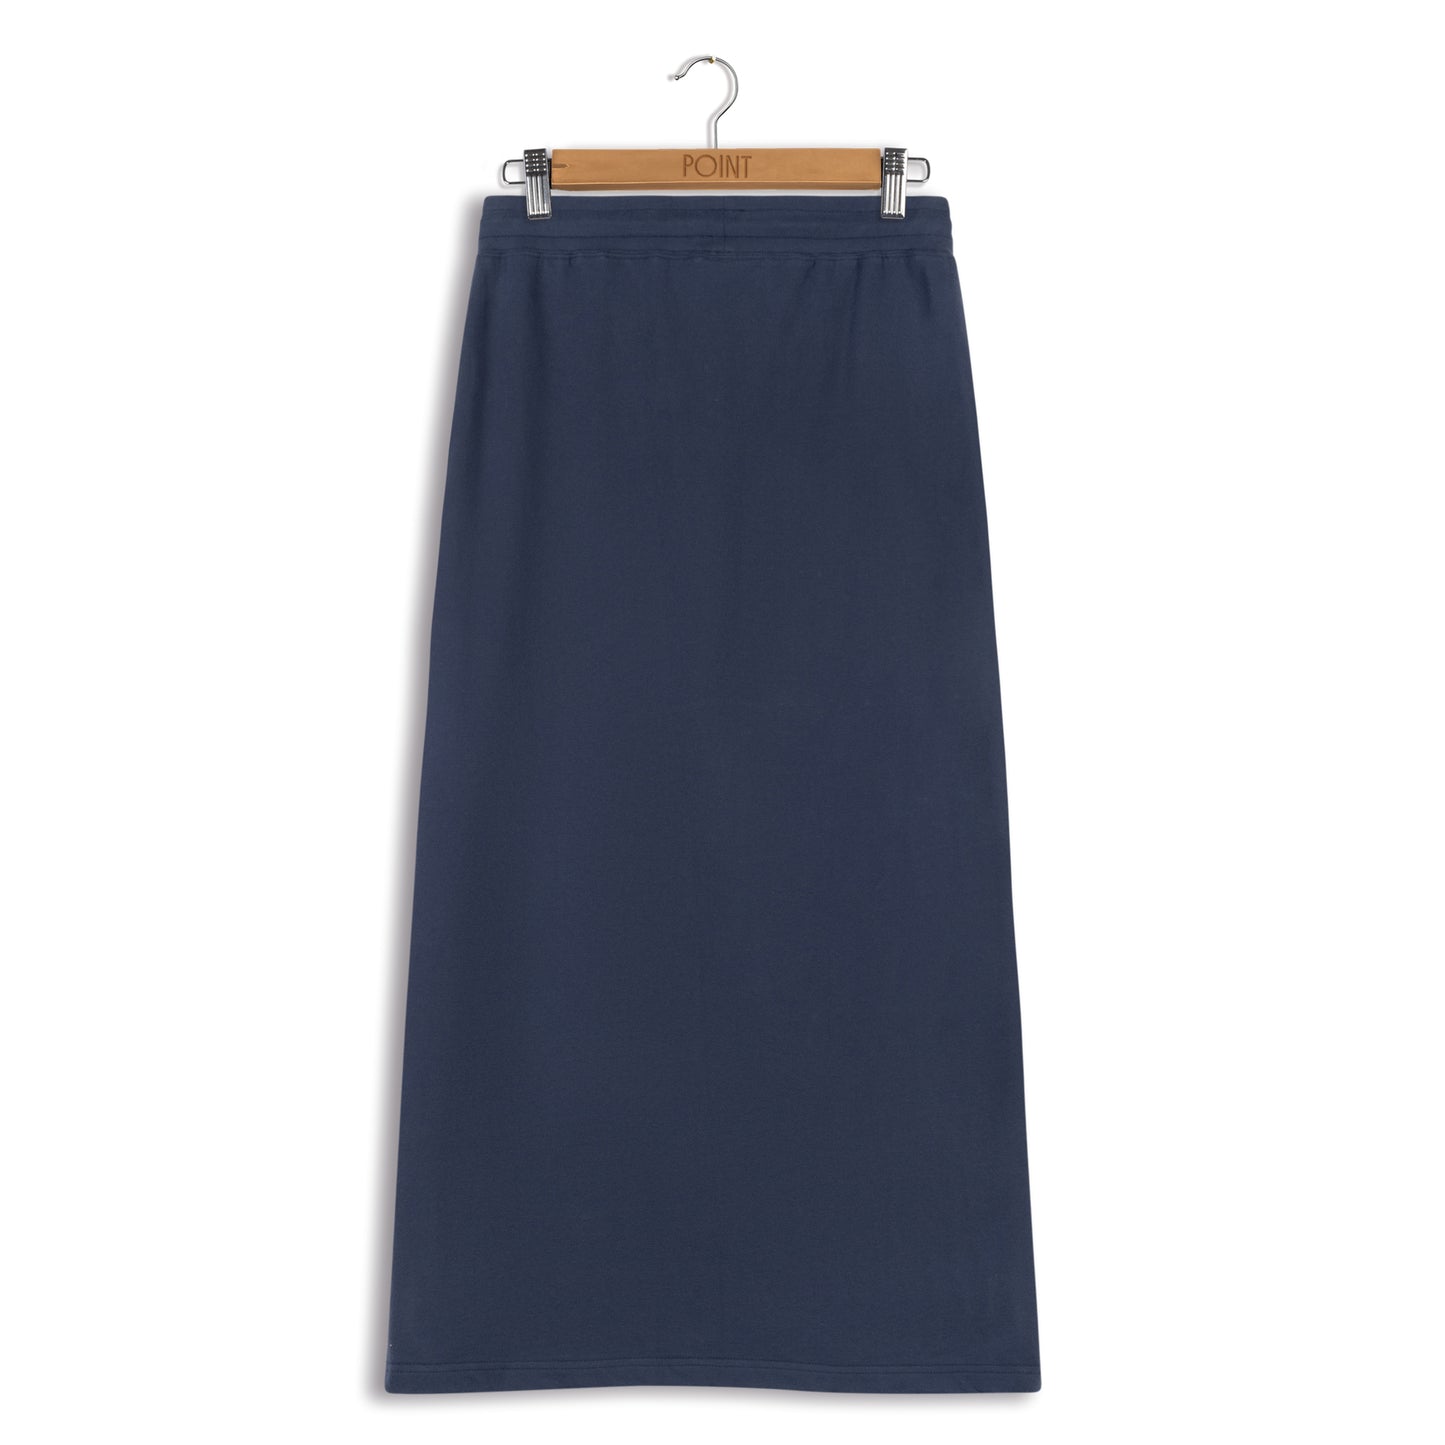 point maxi skirt with pkt